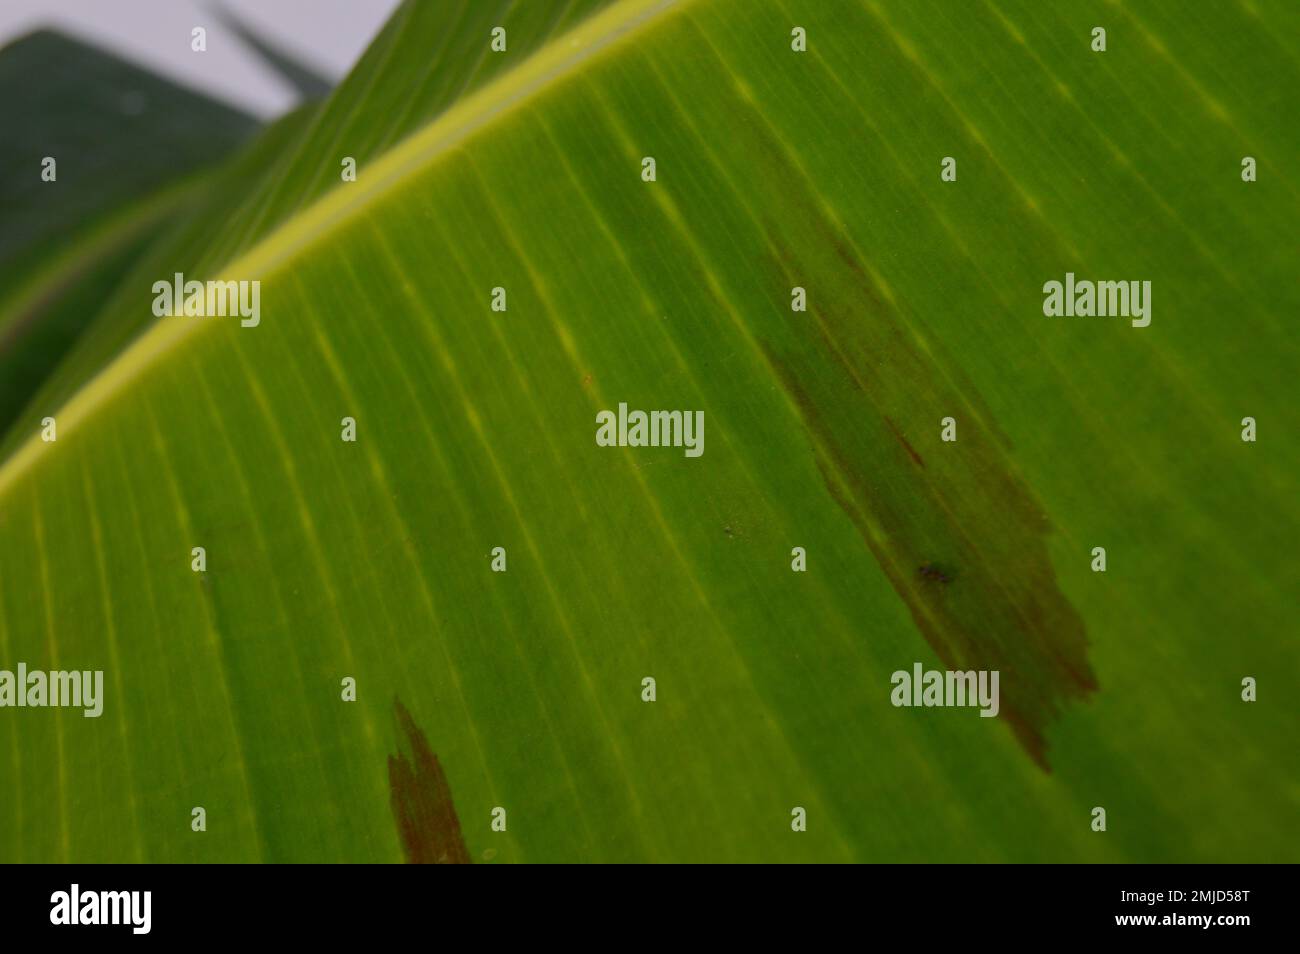 The photo of the split leaf shows the surface structure of the curved banana leaves and stems with natural colors, with blotches on the surface. Stock Photo